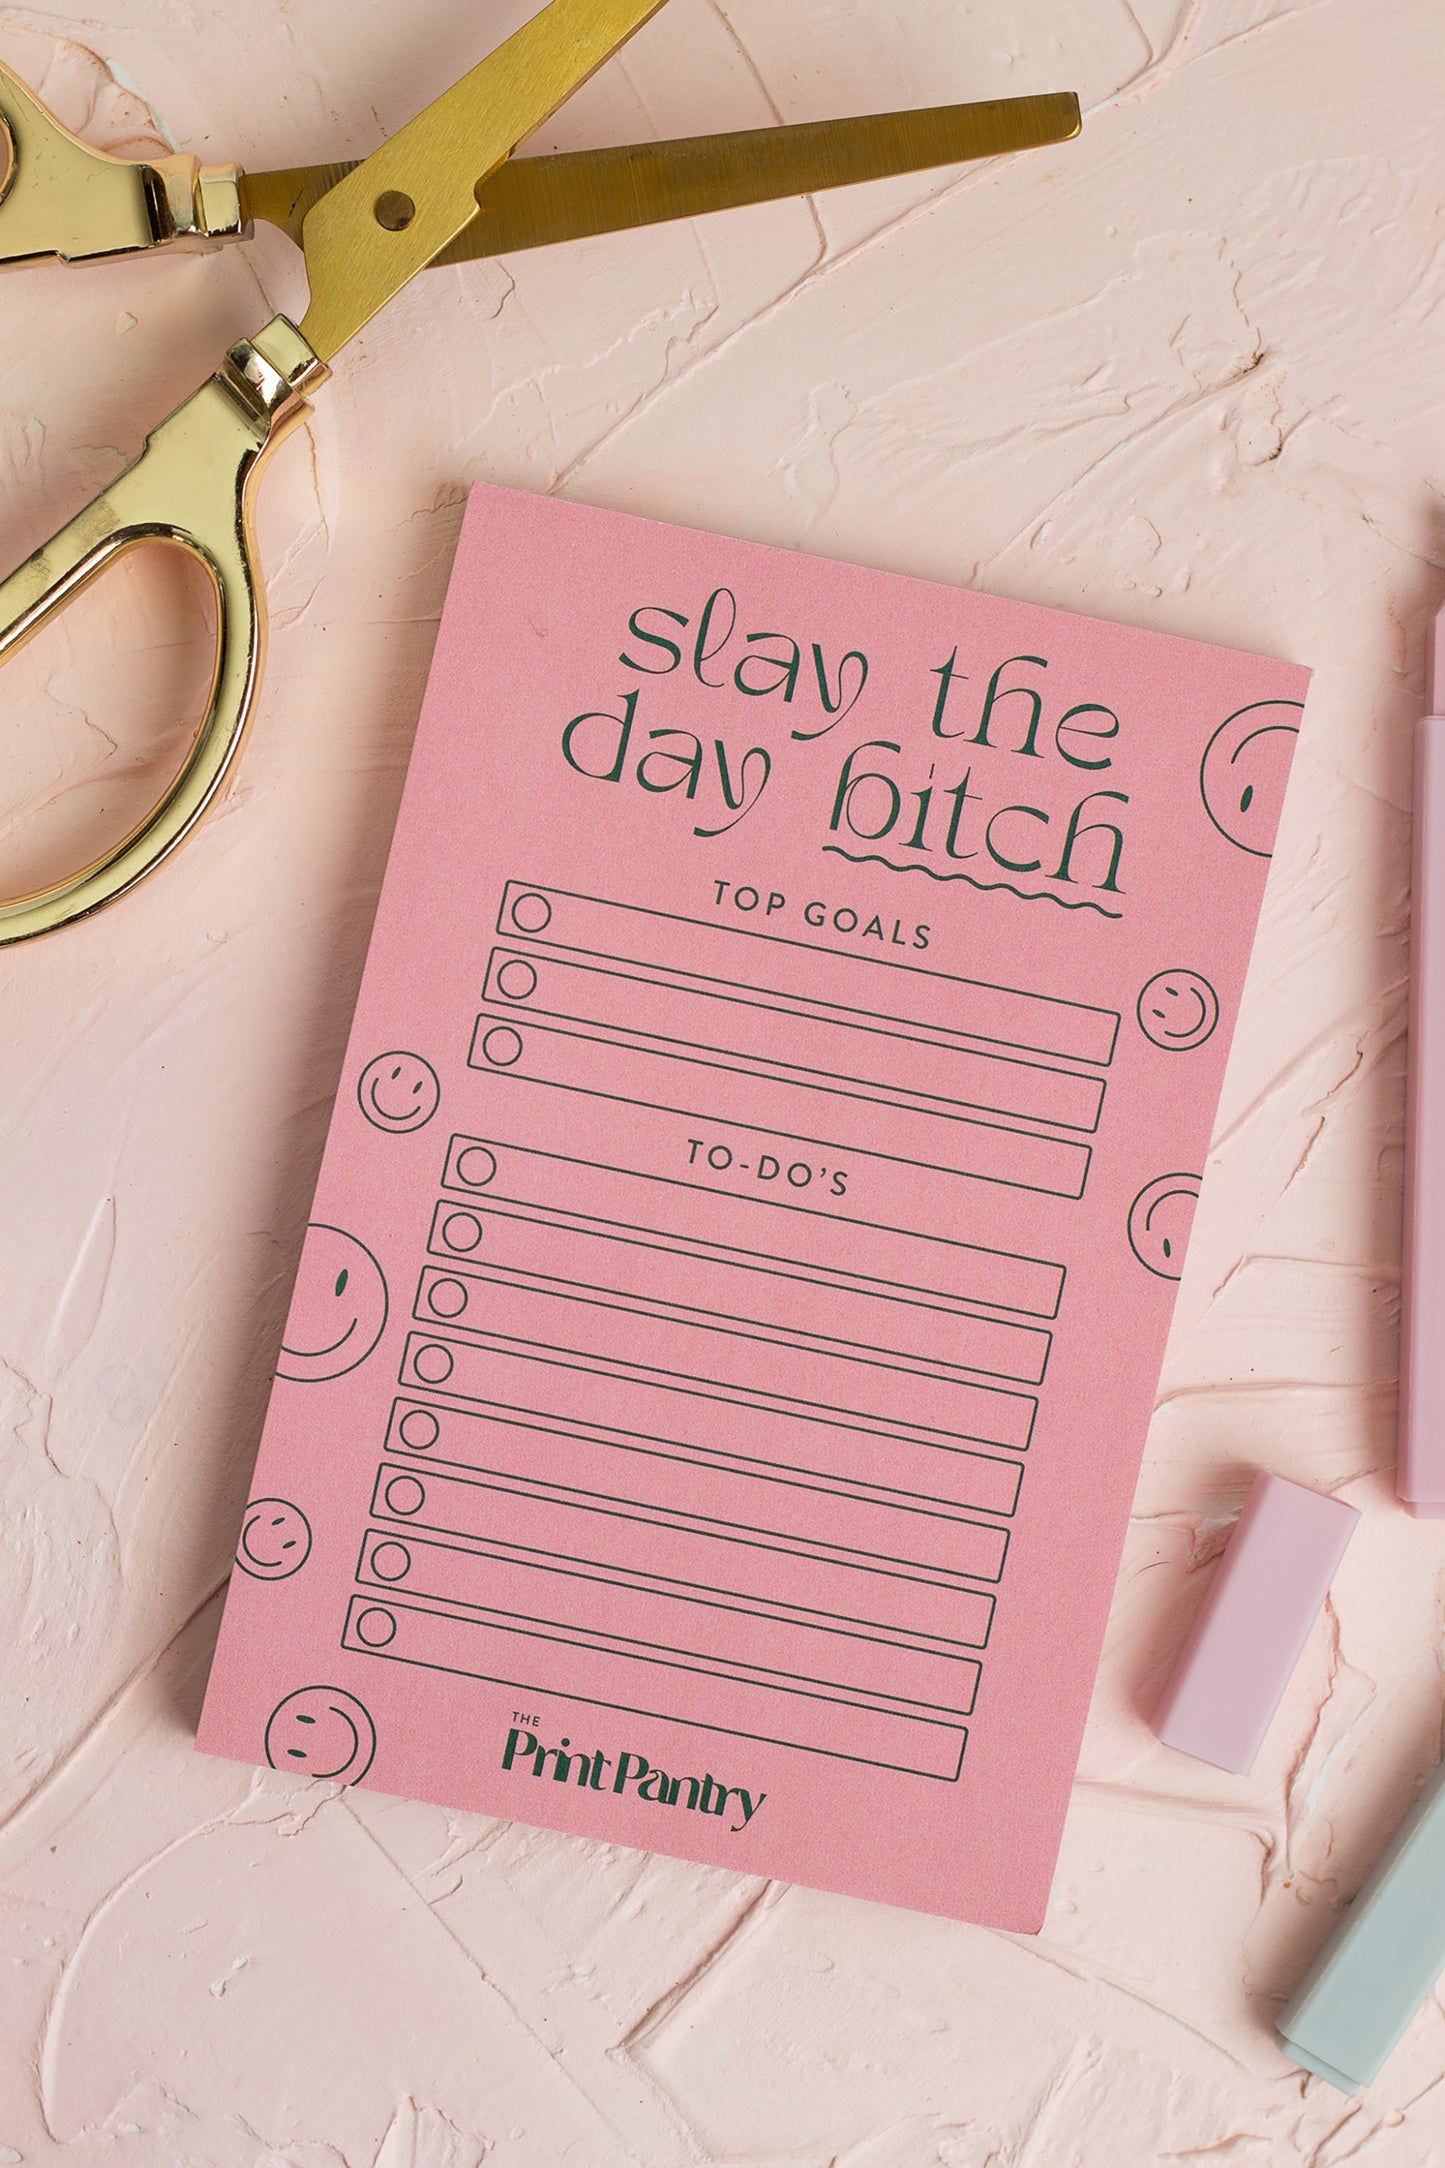 Funny notepads for work